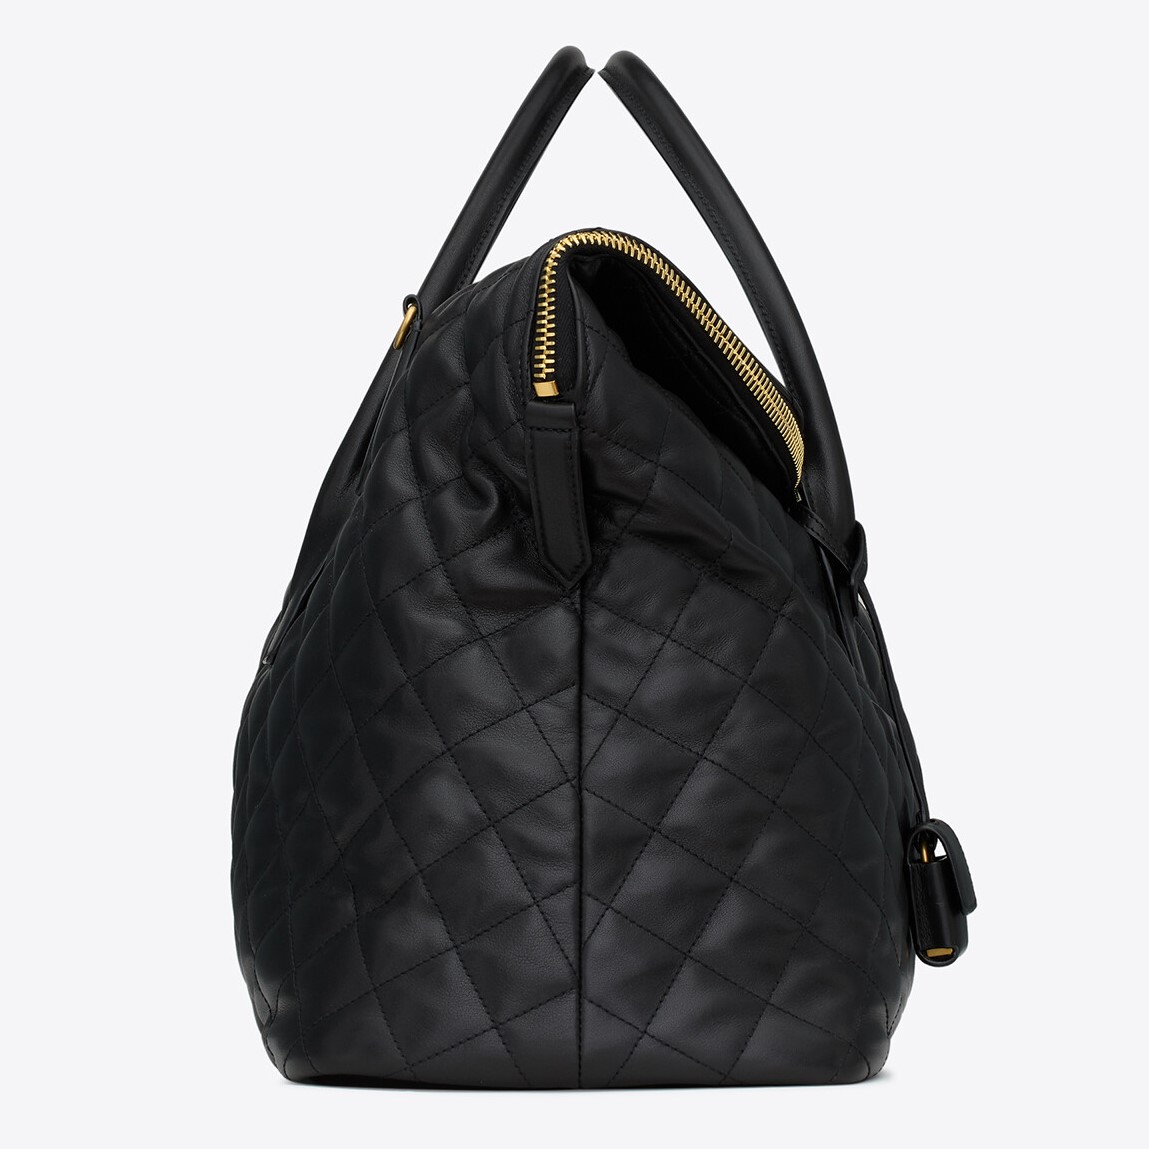 TÚI DU LỊCH YSL ES GIANT TRAVEL BAG IN QUILTED LEATHER 3